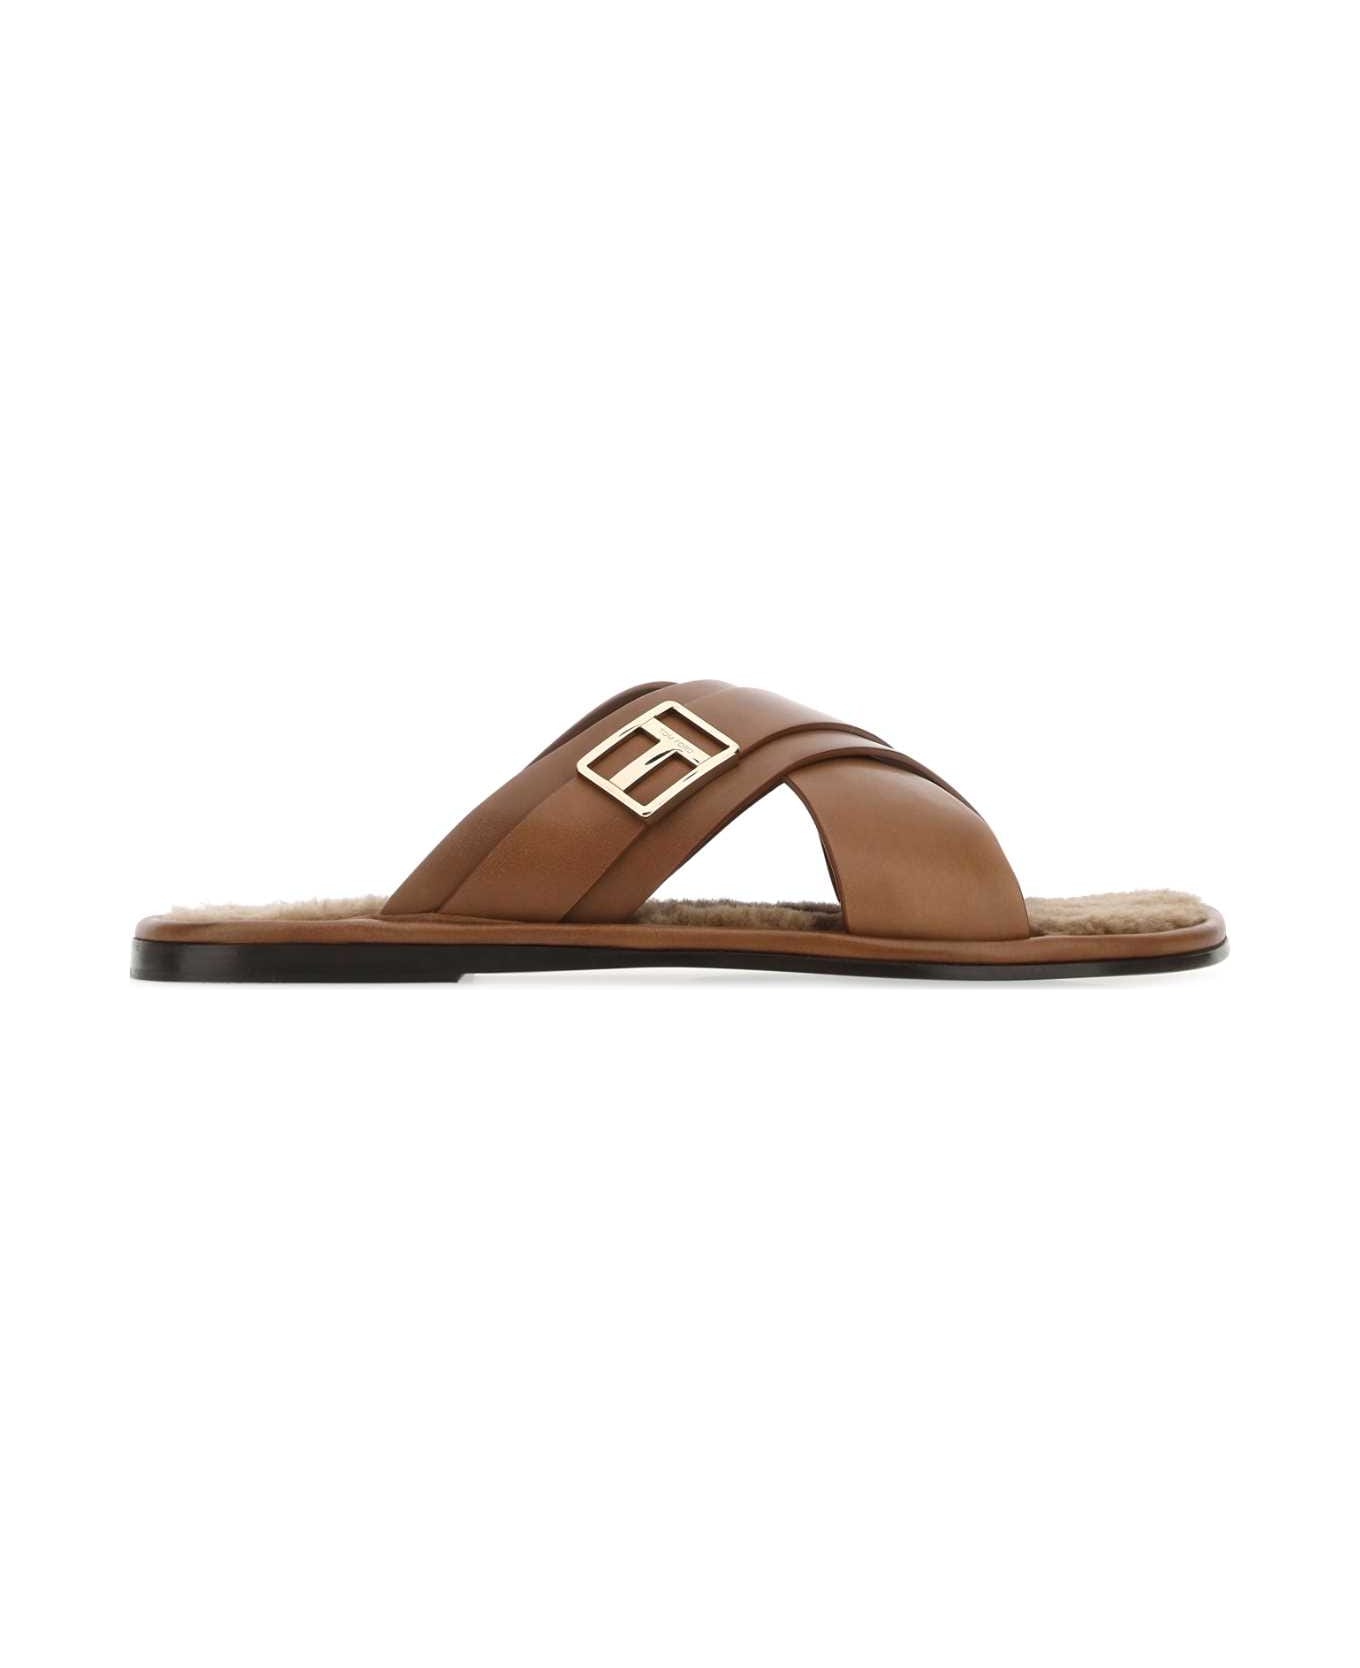 Tom Ford Brown Leather Slippers - 1B031